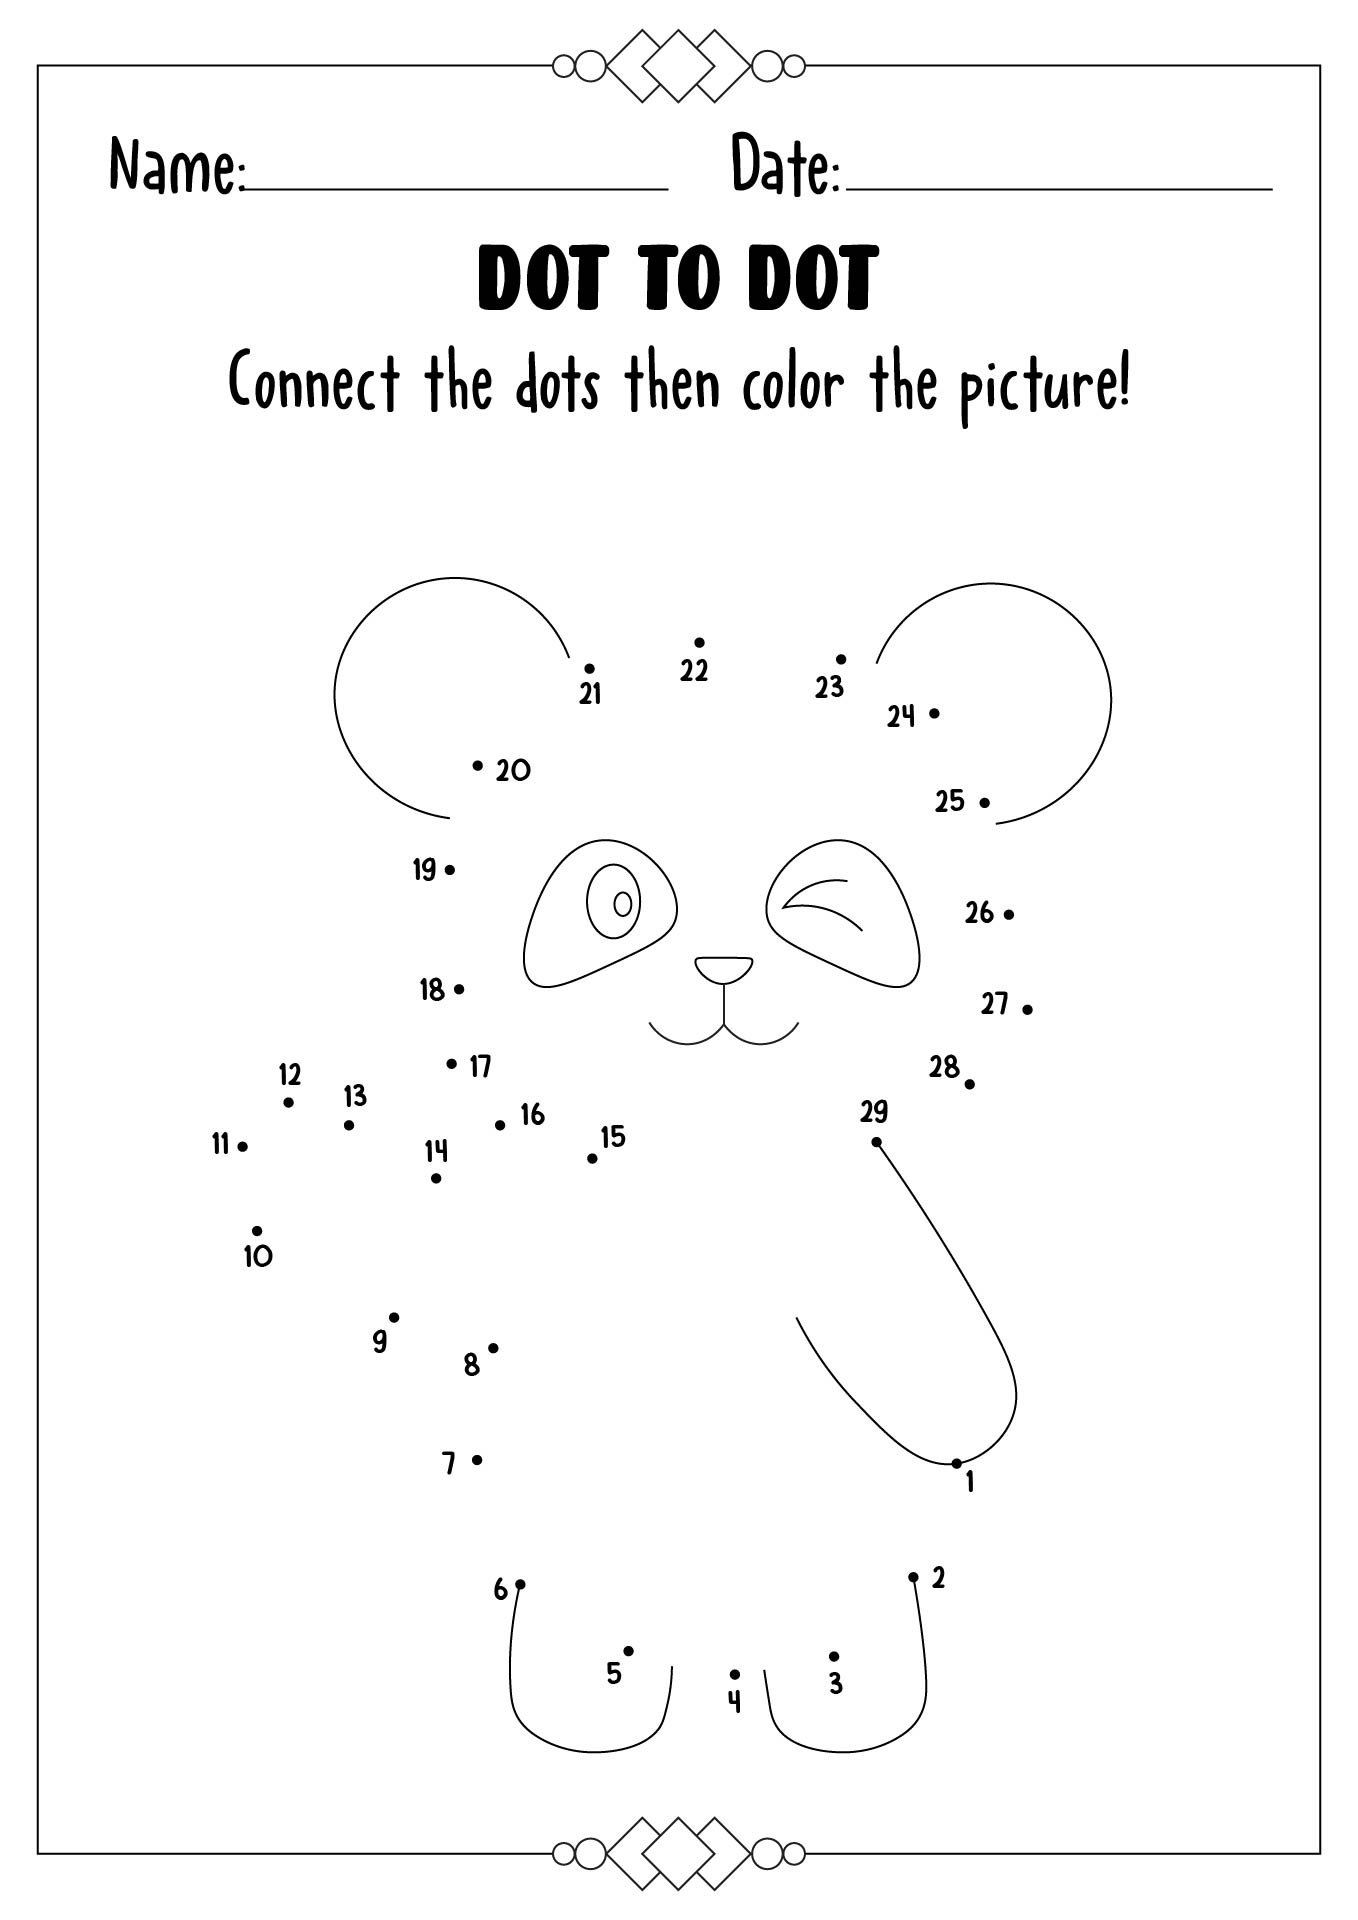 penguin-dot-to-dots-coloring-page-free-printable-coloring-pages-for-kids